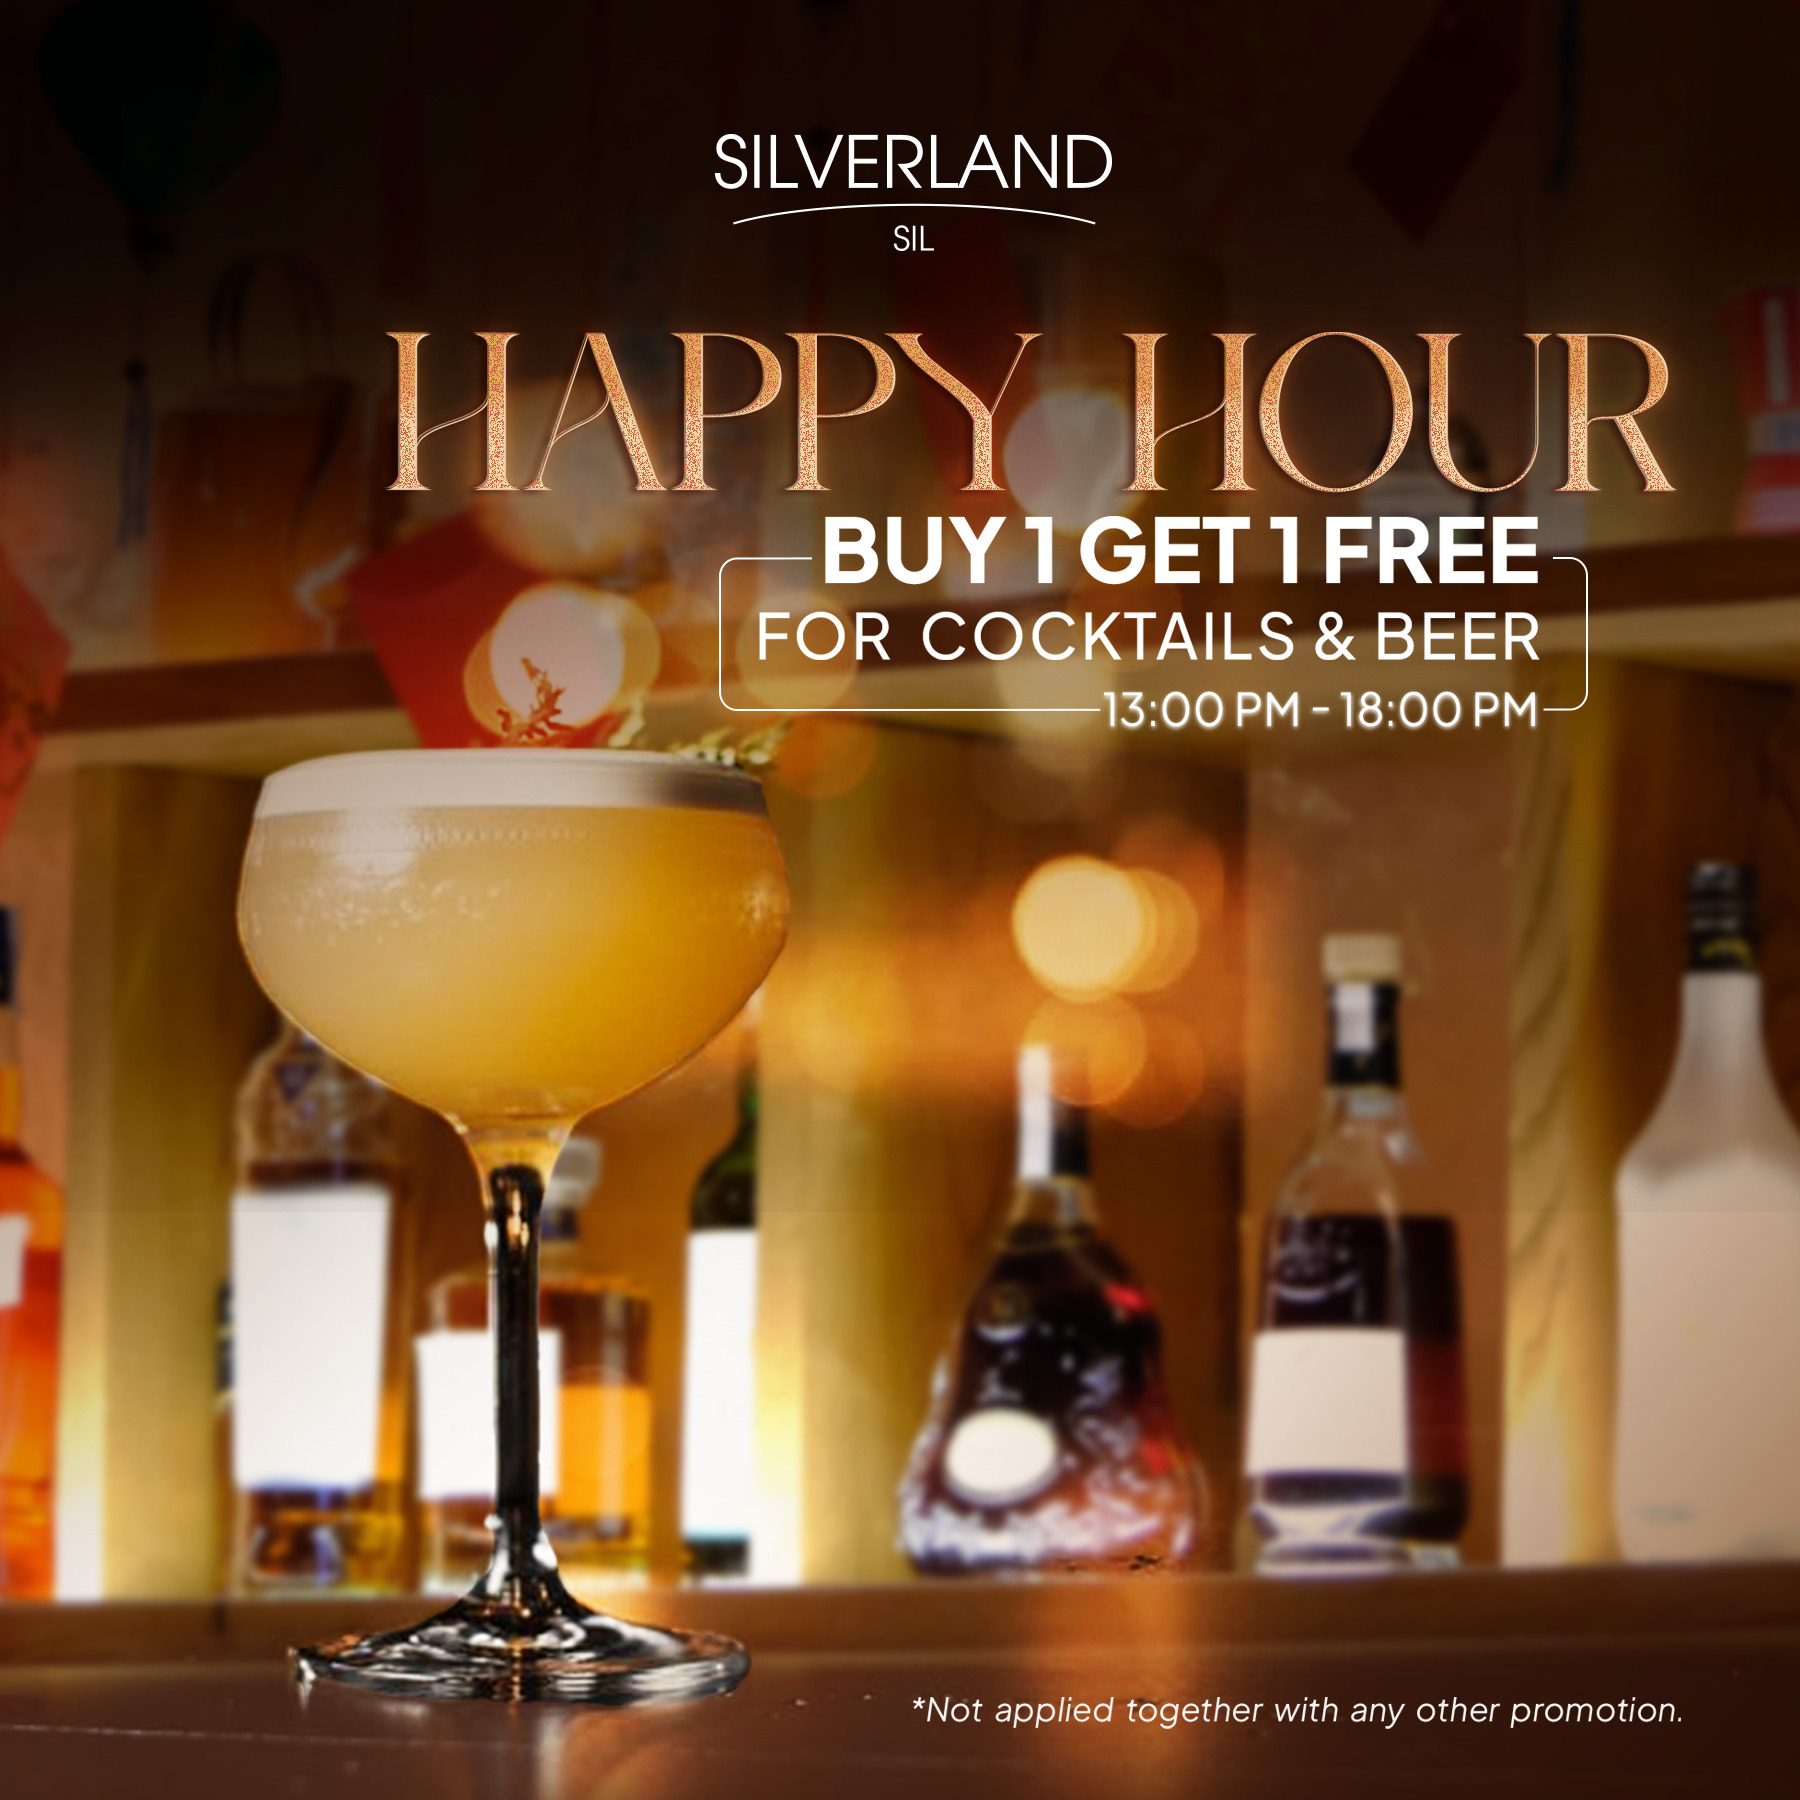 SIL ROOFTOP BAR – Happy Hour